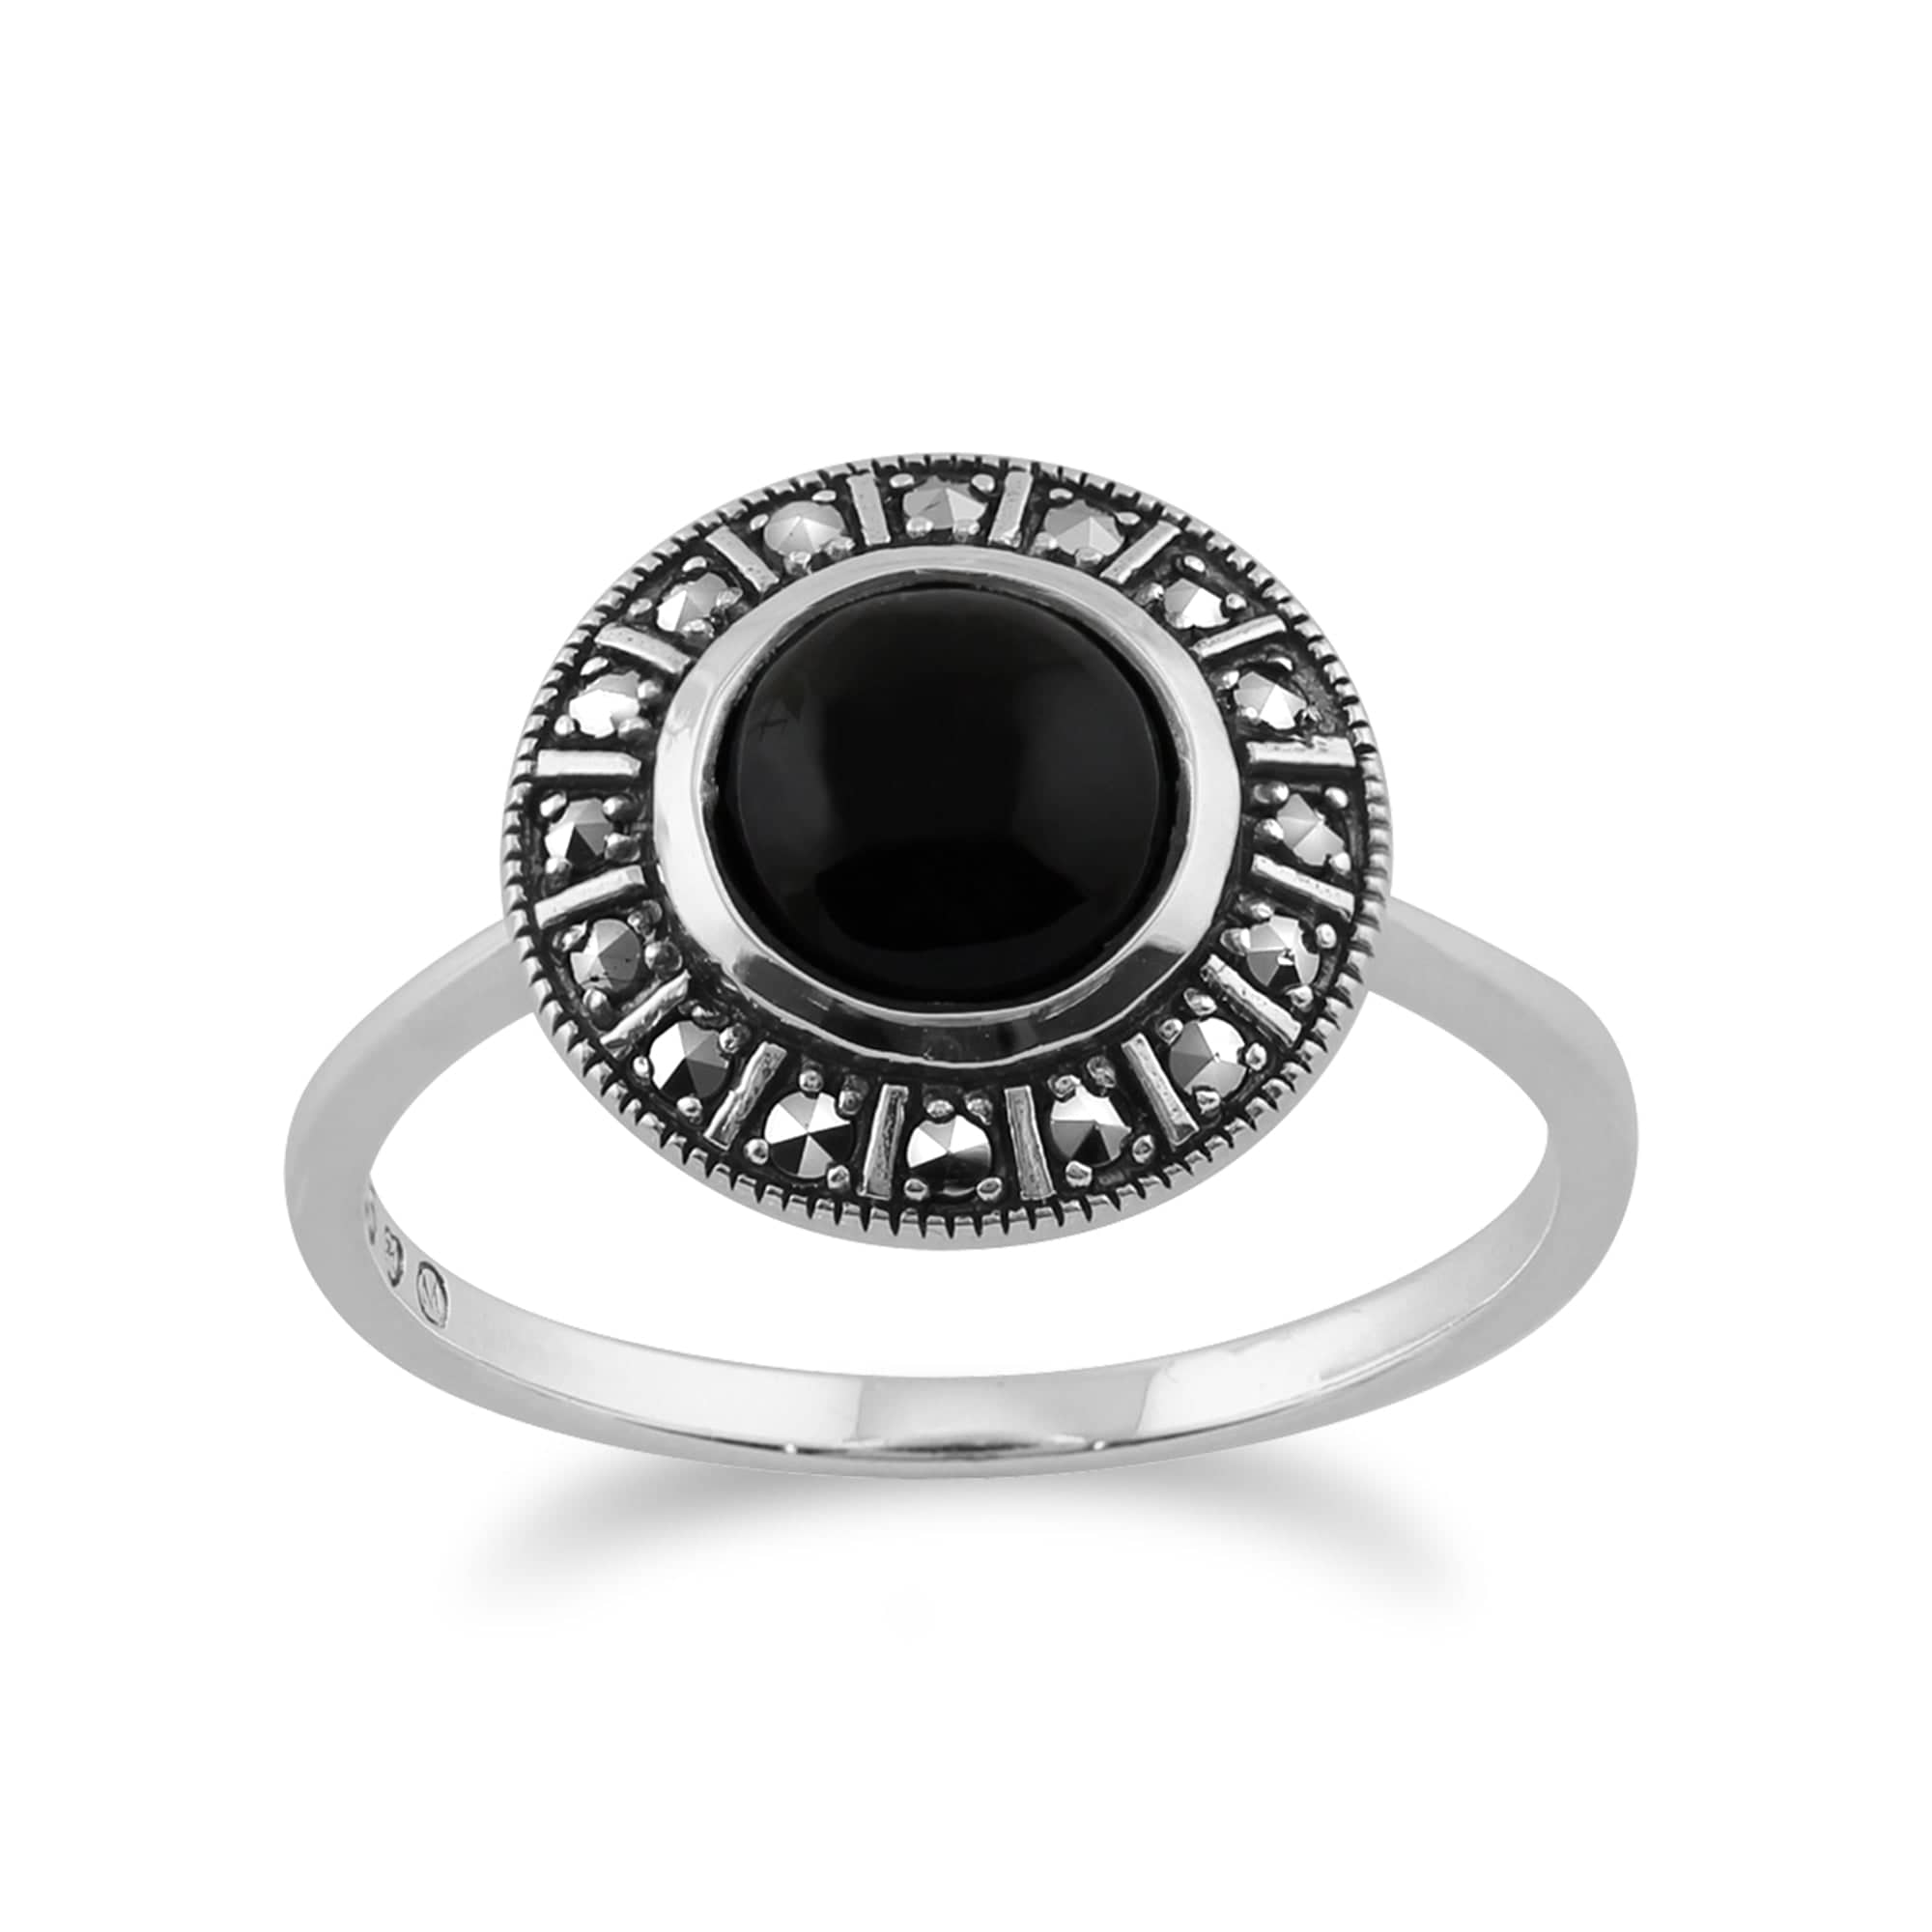 Image of Art Deco Style Round Black Onyx Cabochon & Marcasite Halo Ring in 925 Sterling Silver